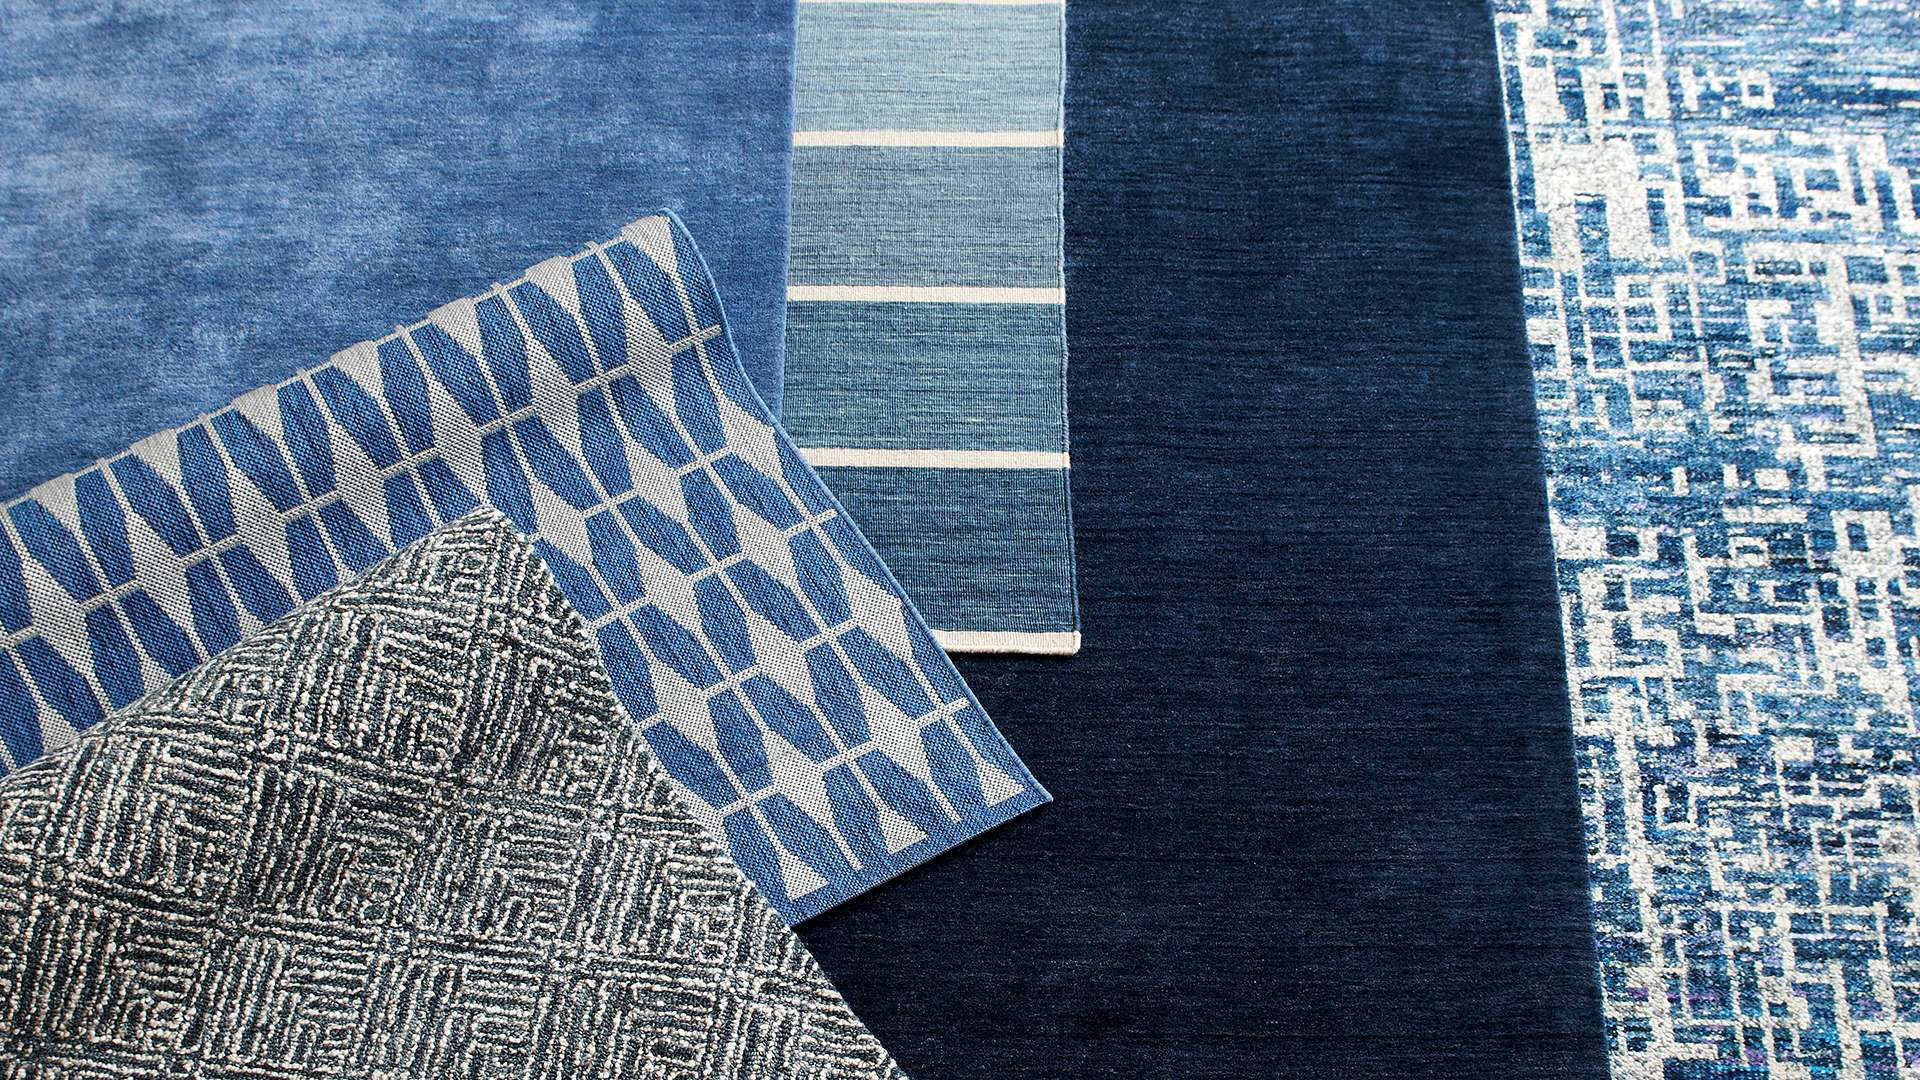 A variety blue patterned rugs layered on top of each other. Shop blue trend.